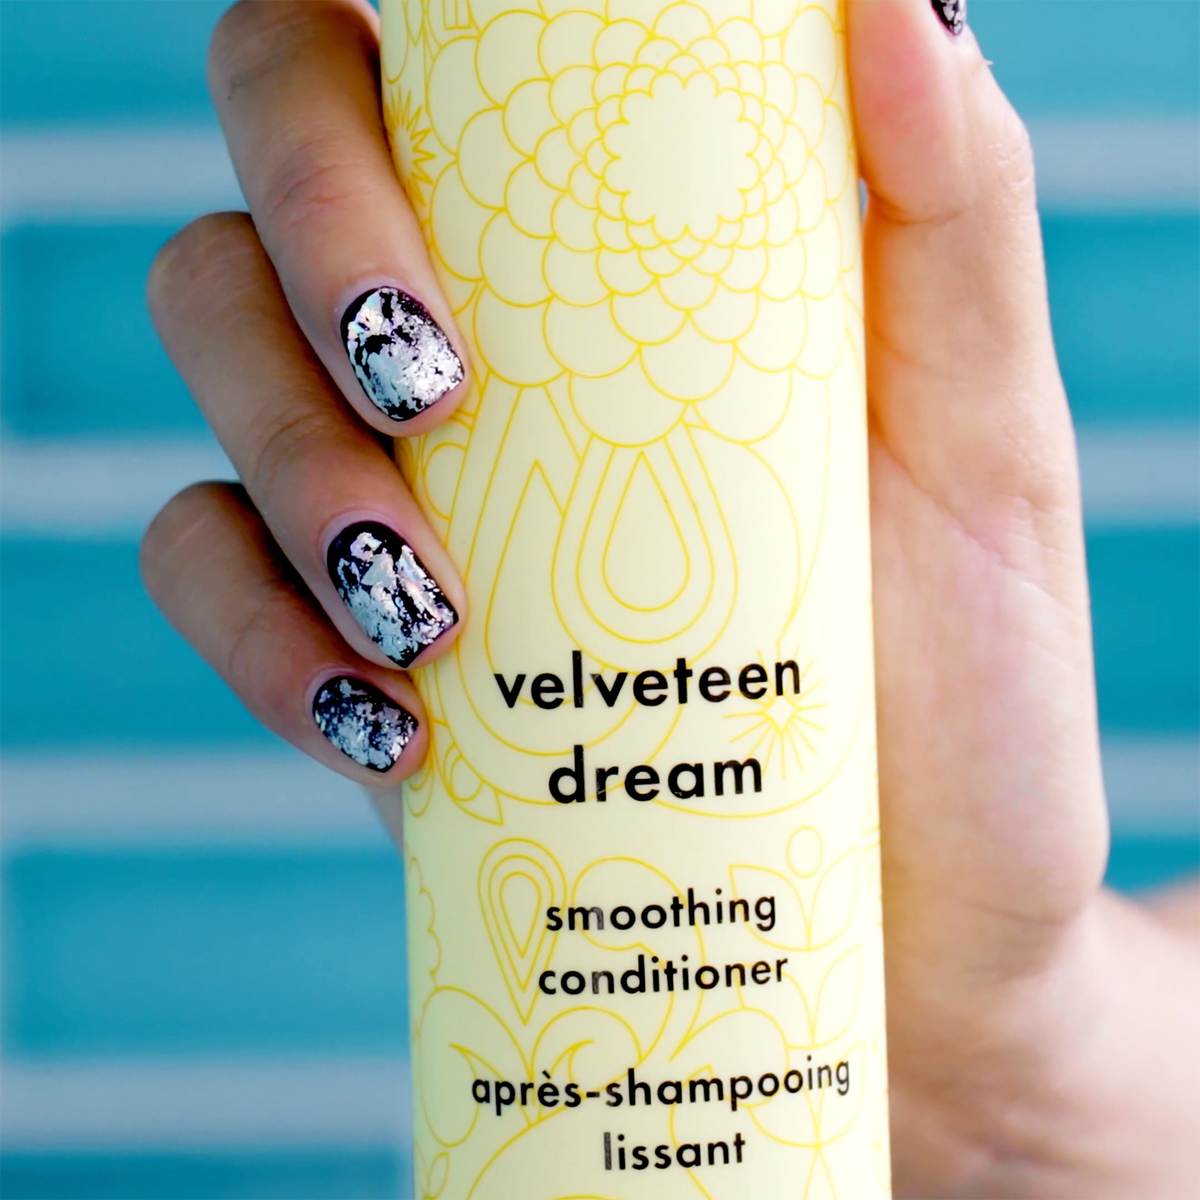 Amika VELVETEEN DREAM smoothing conditioner - Totality Skincare